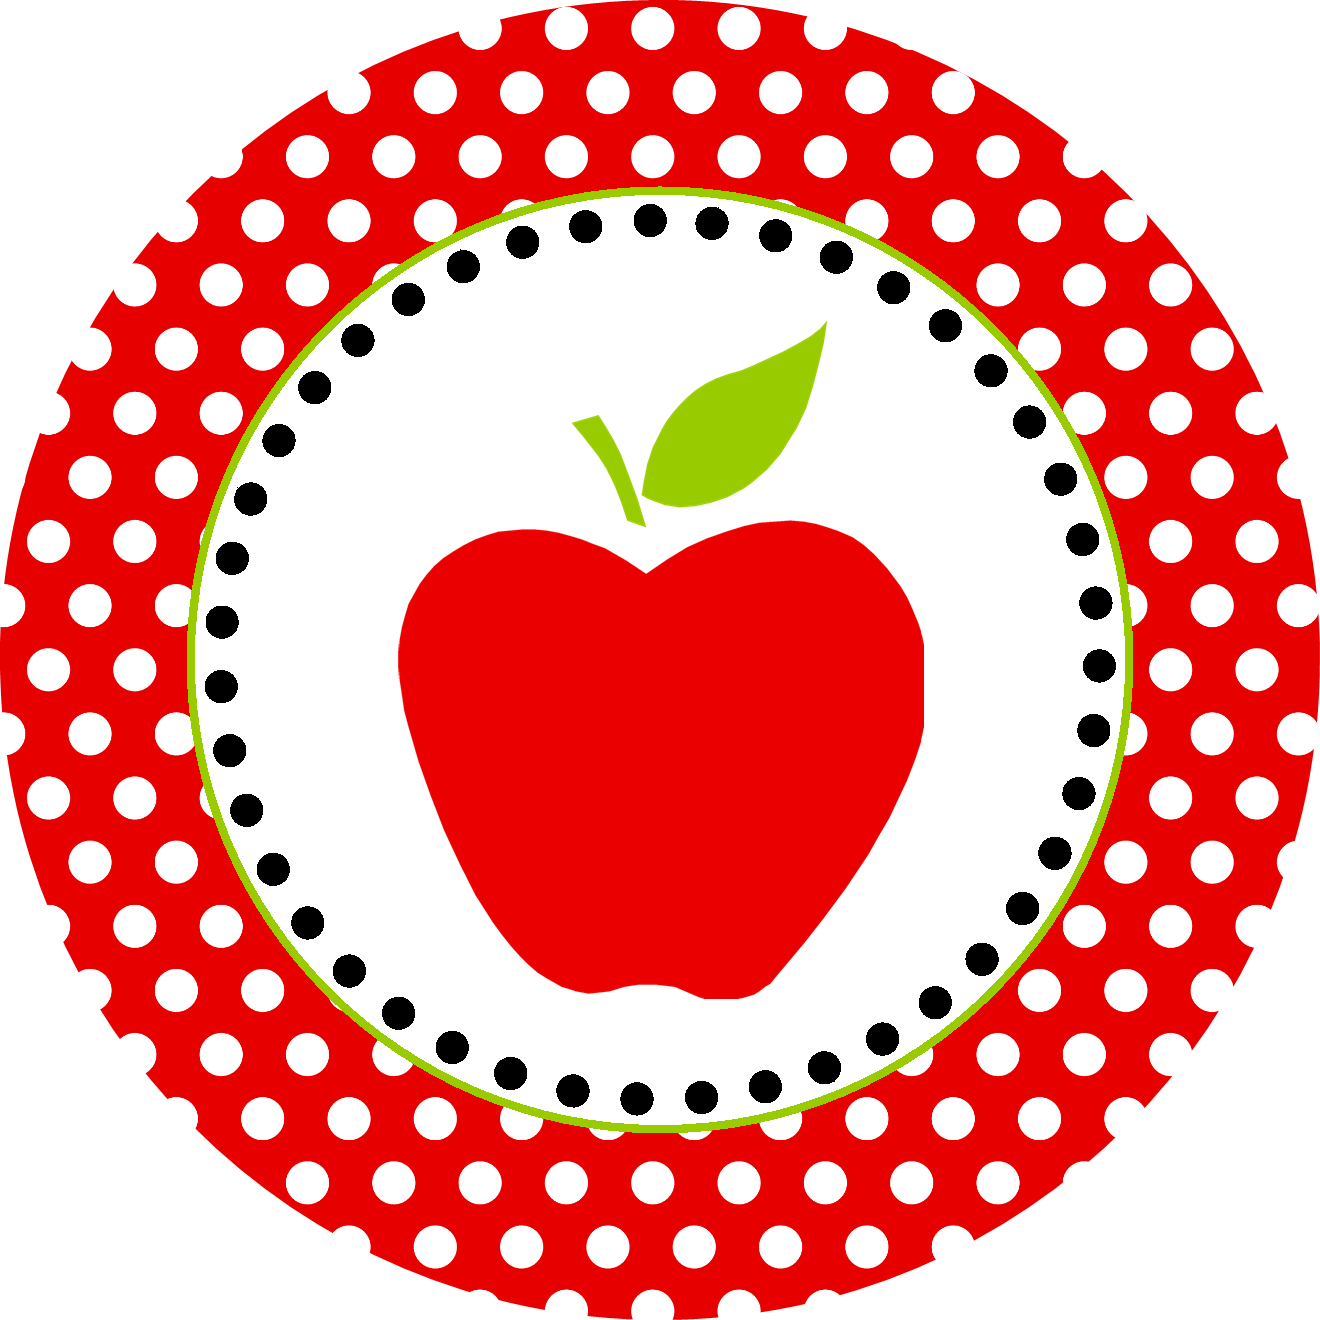 apple back to school clipart - photo #22